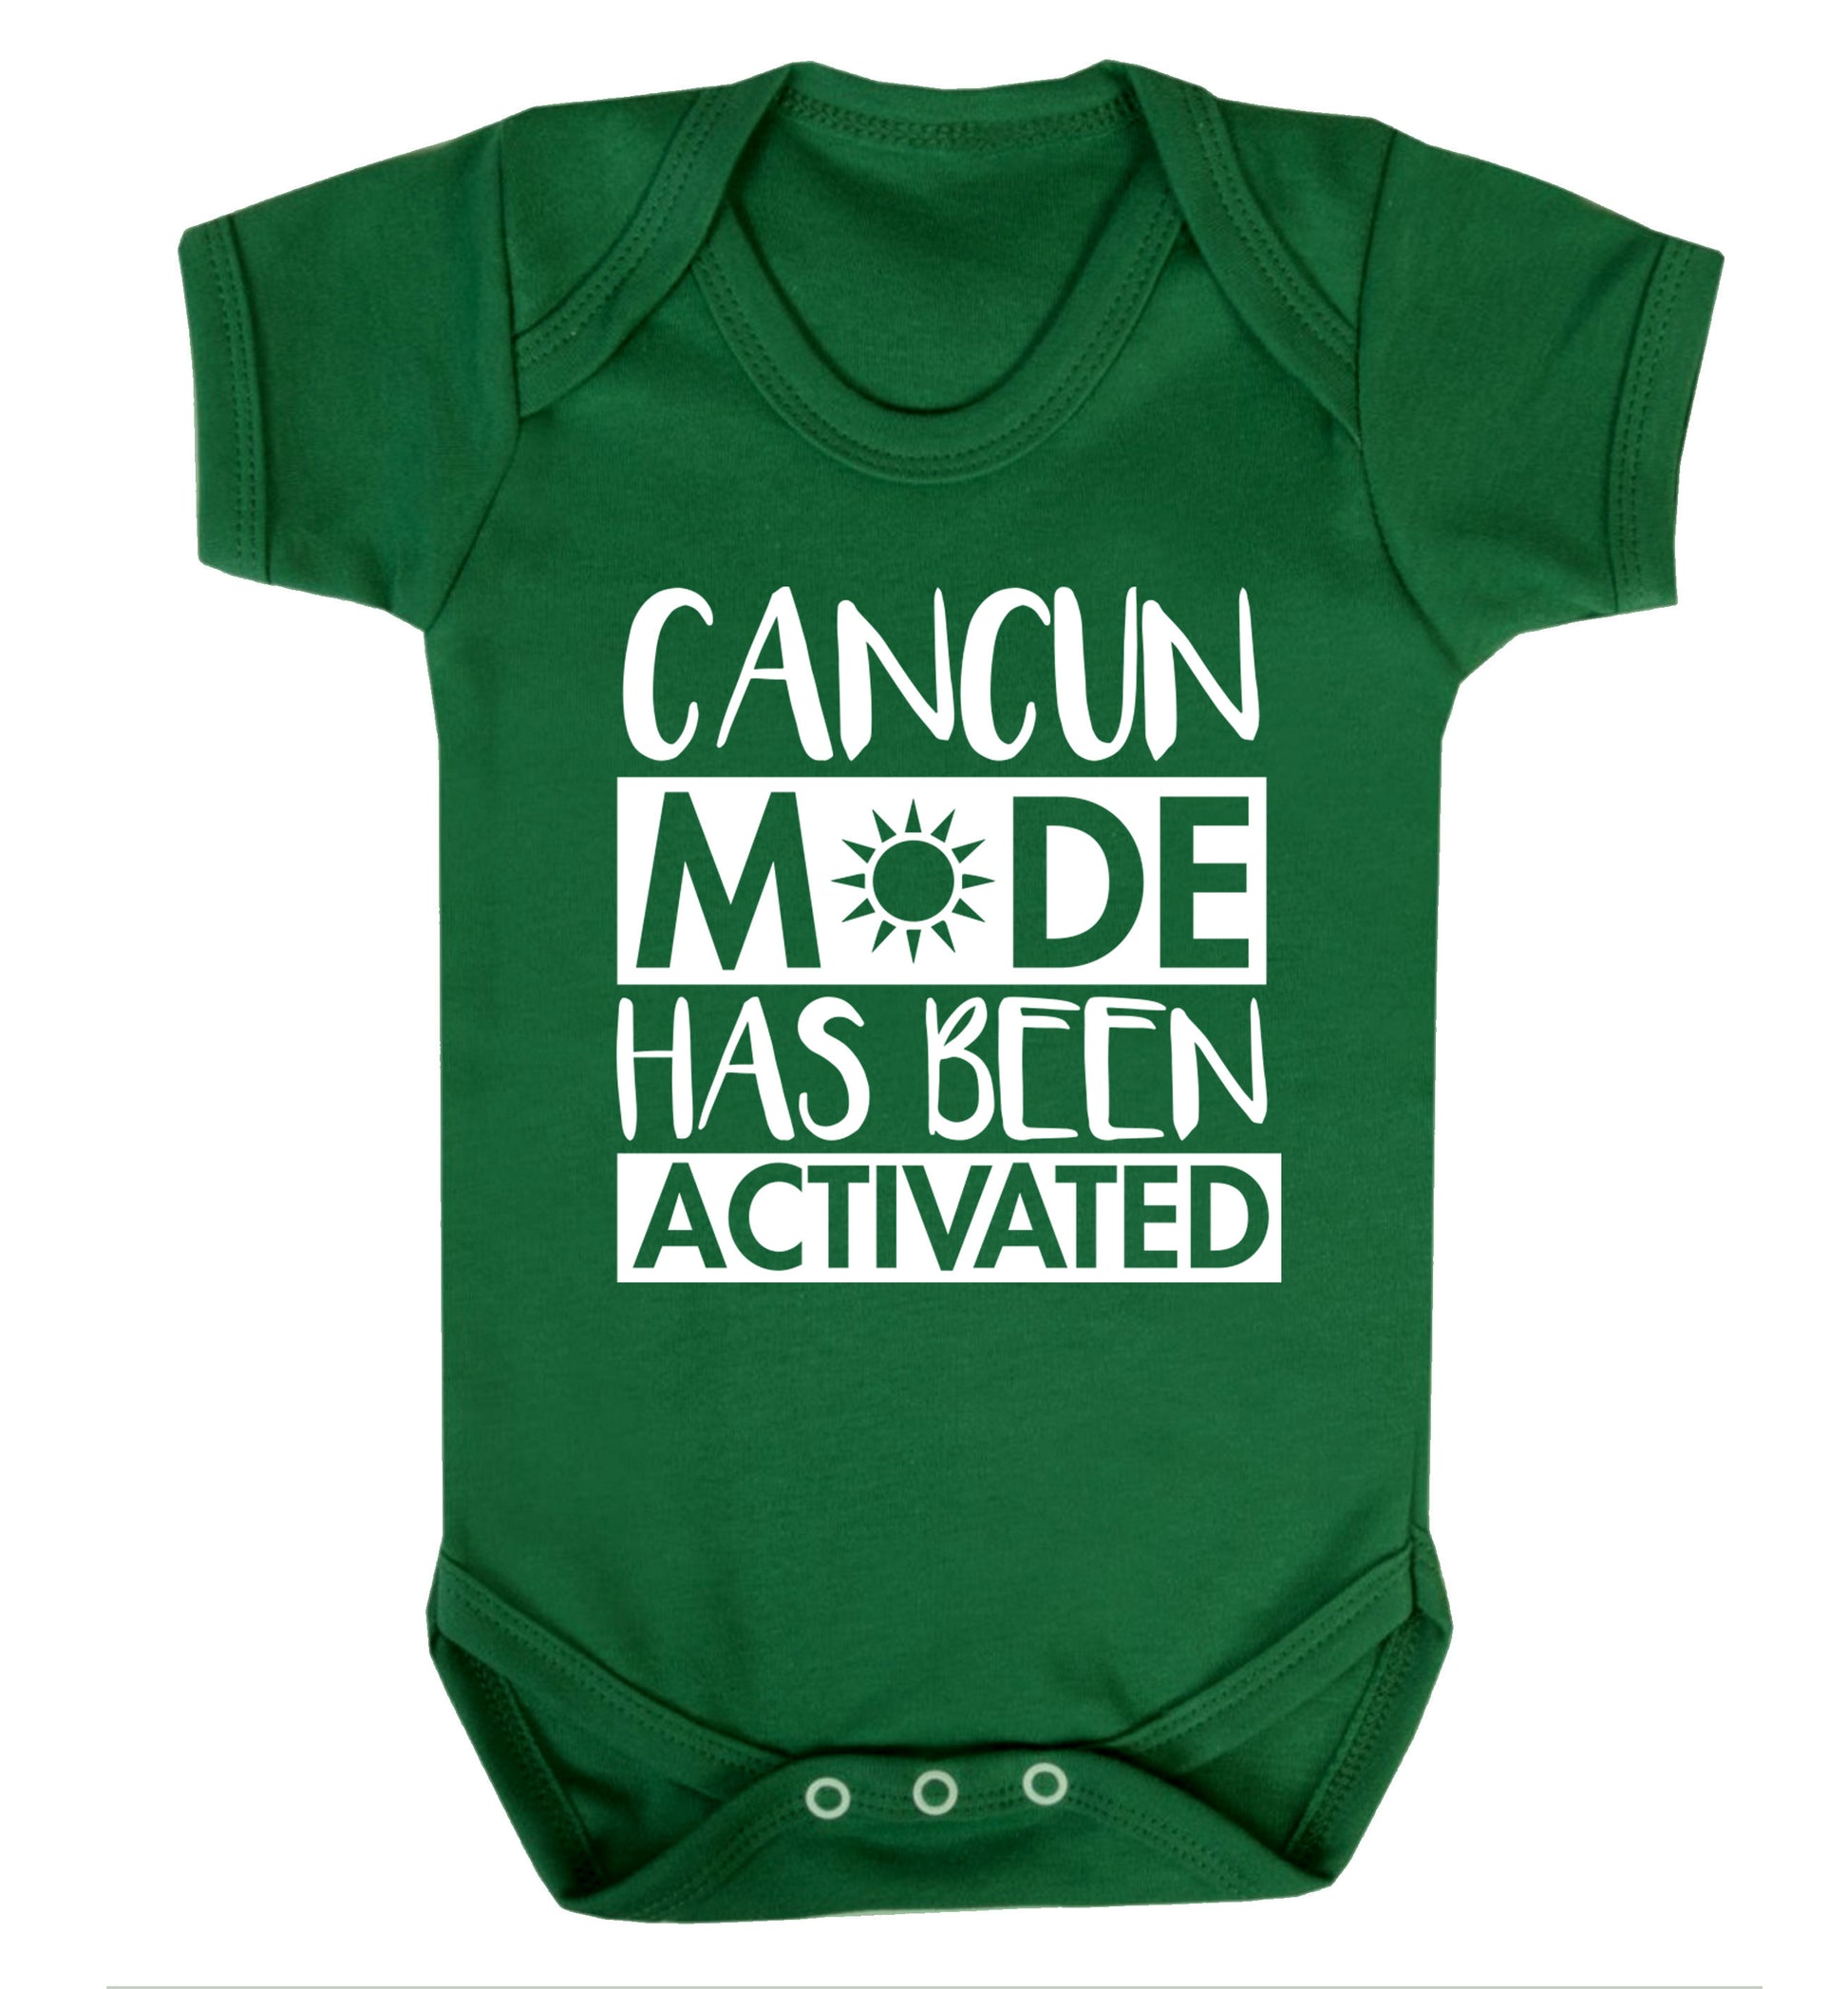 Cancun mode has been activated Baby Vest green 18-24 months